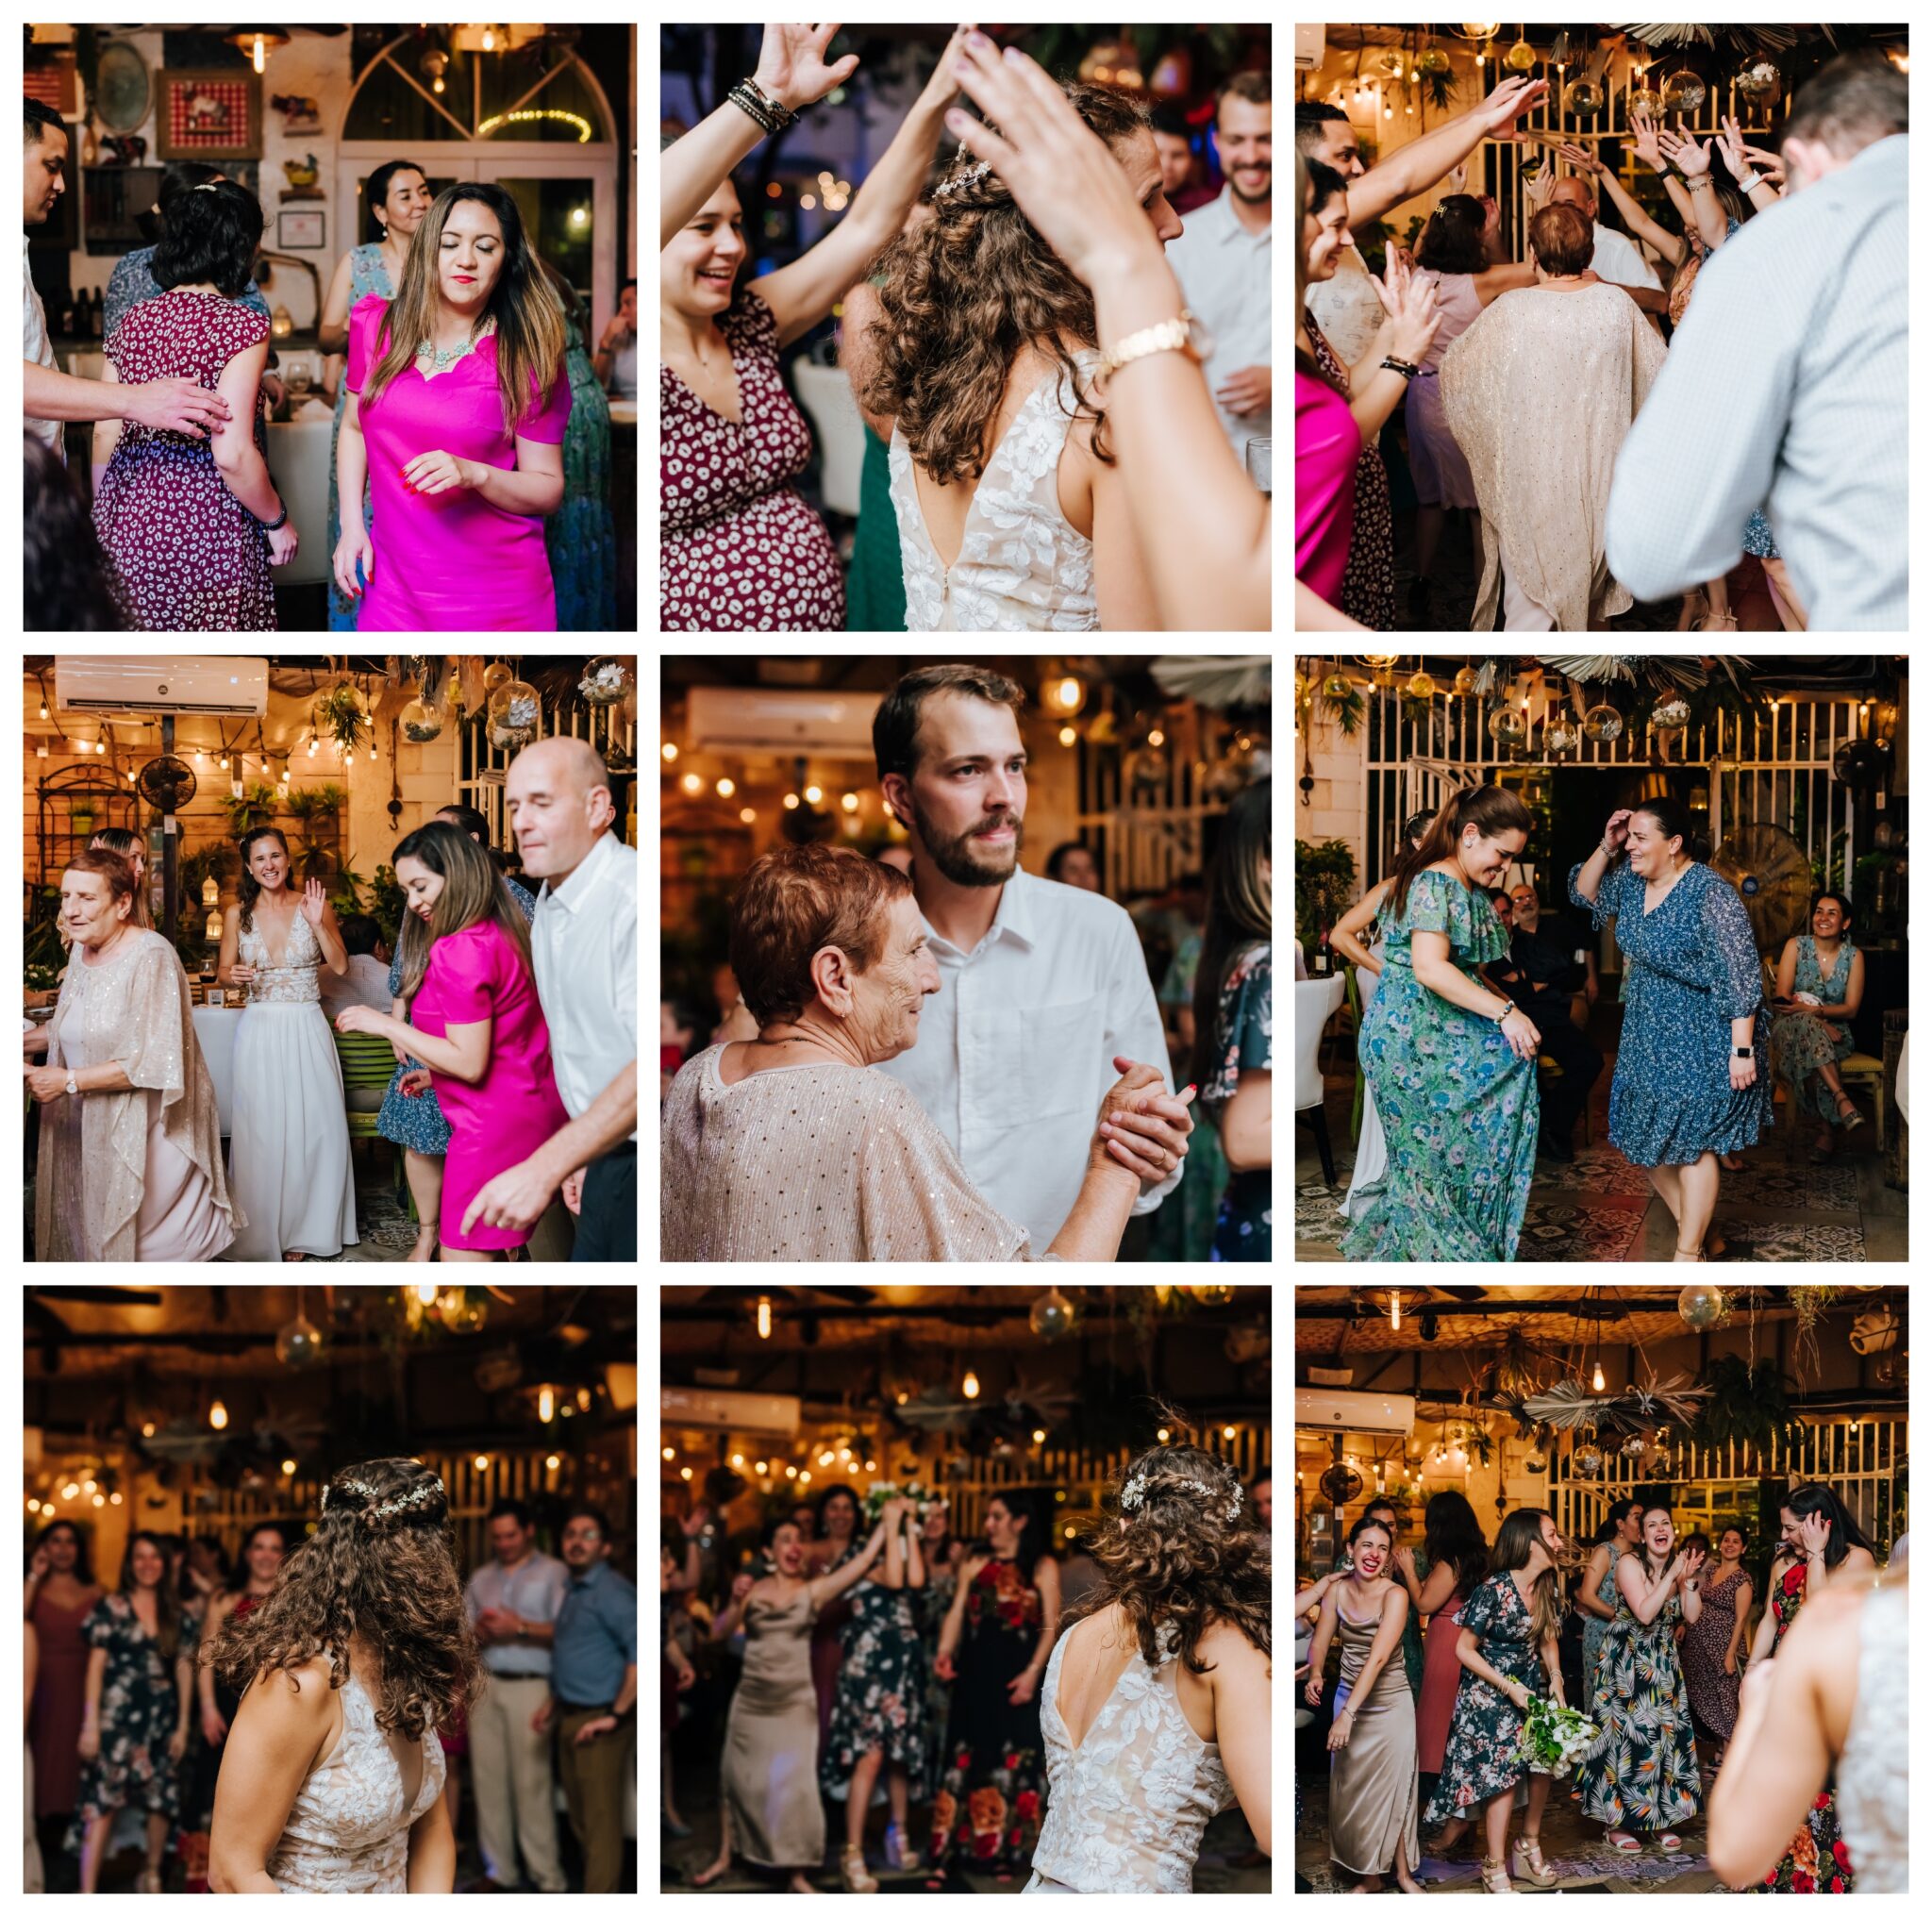 A collage of photos with guests dancing and celebrating